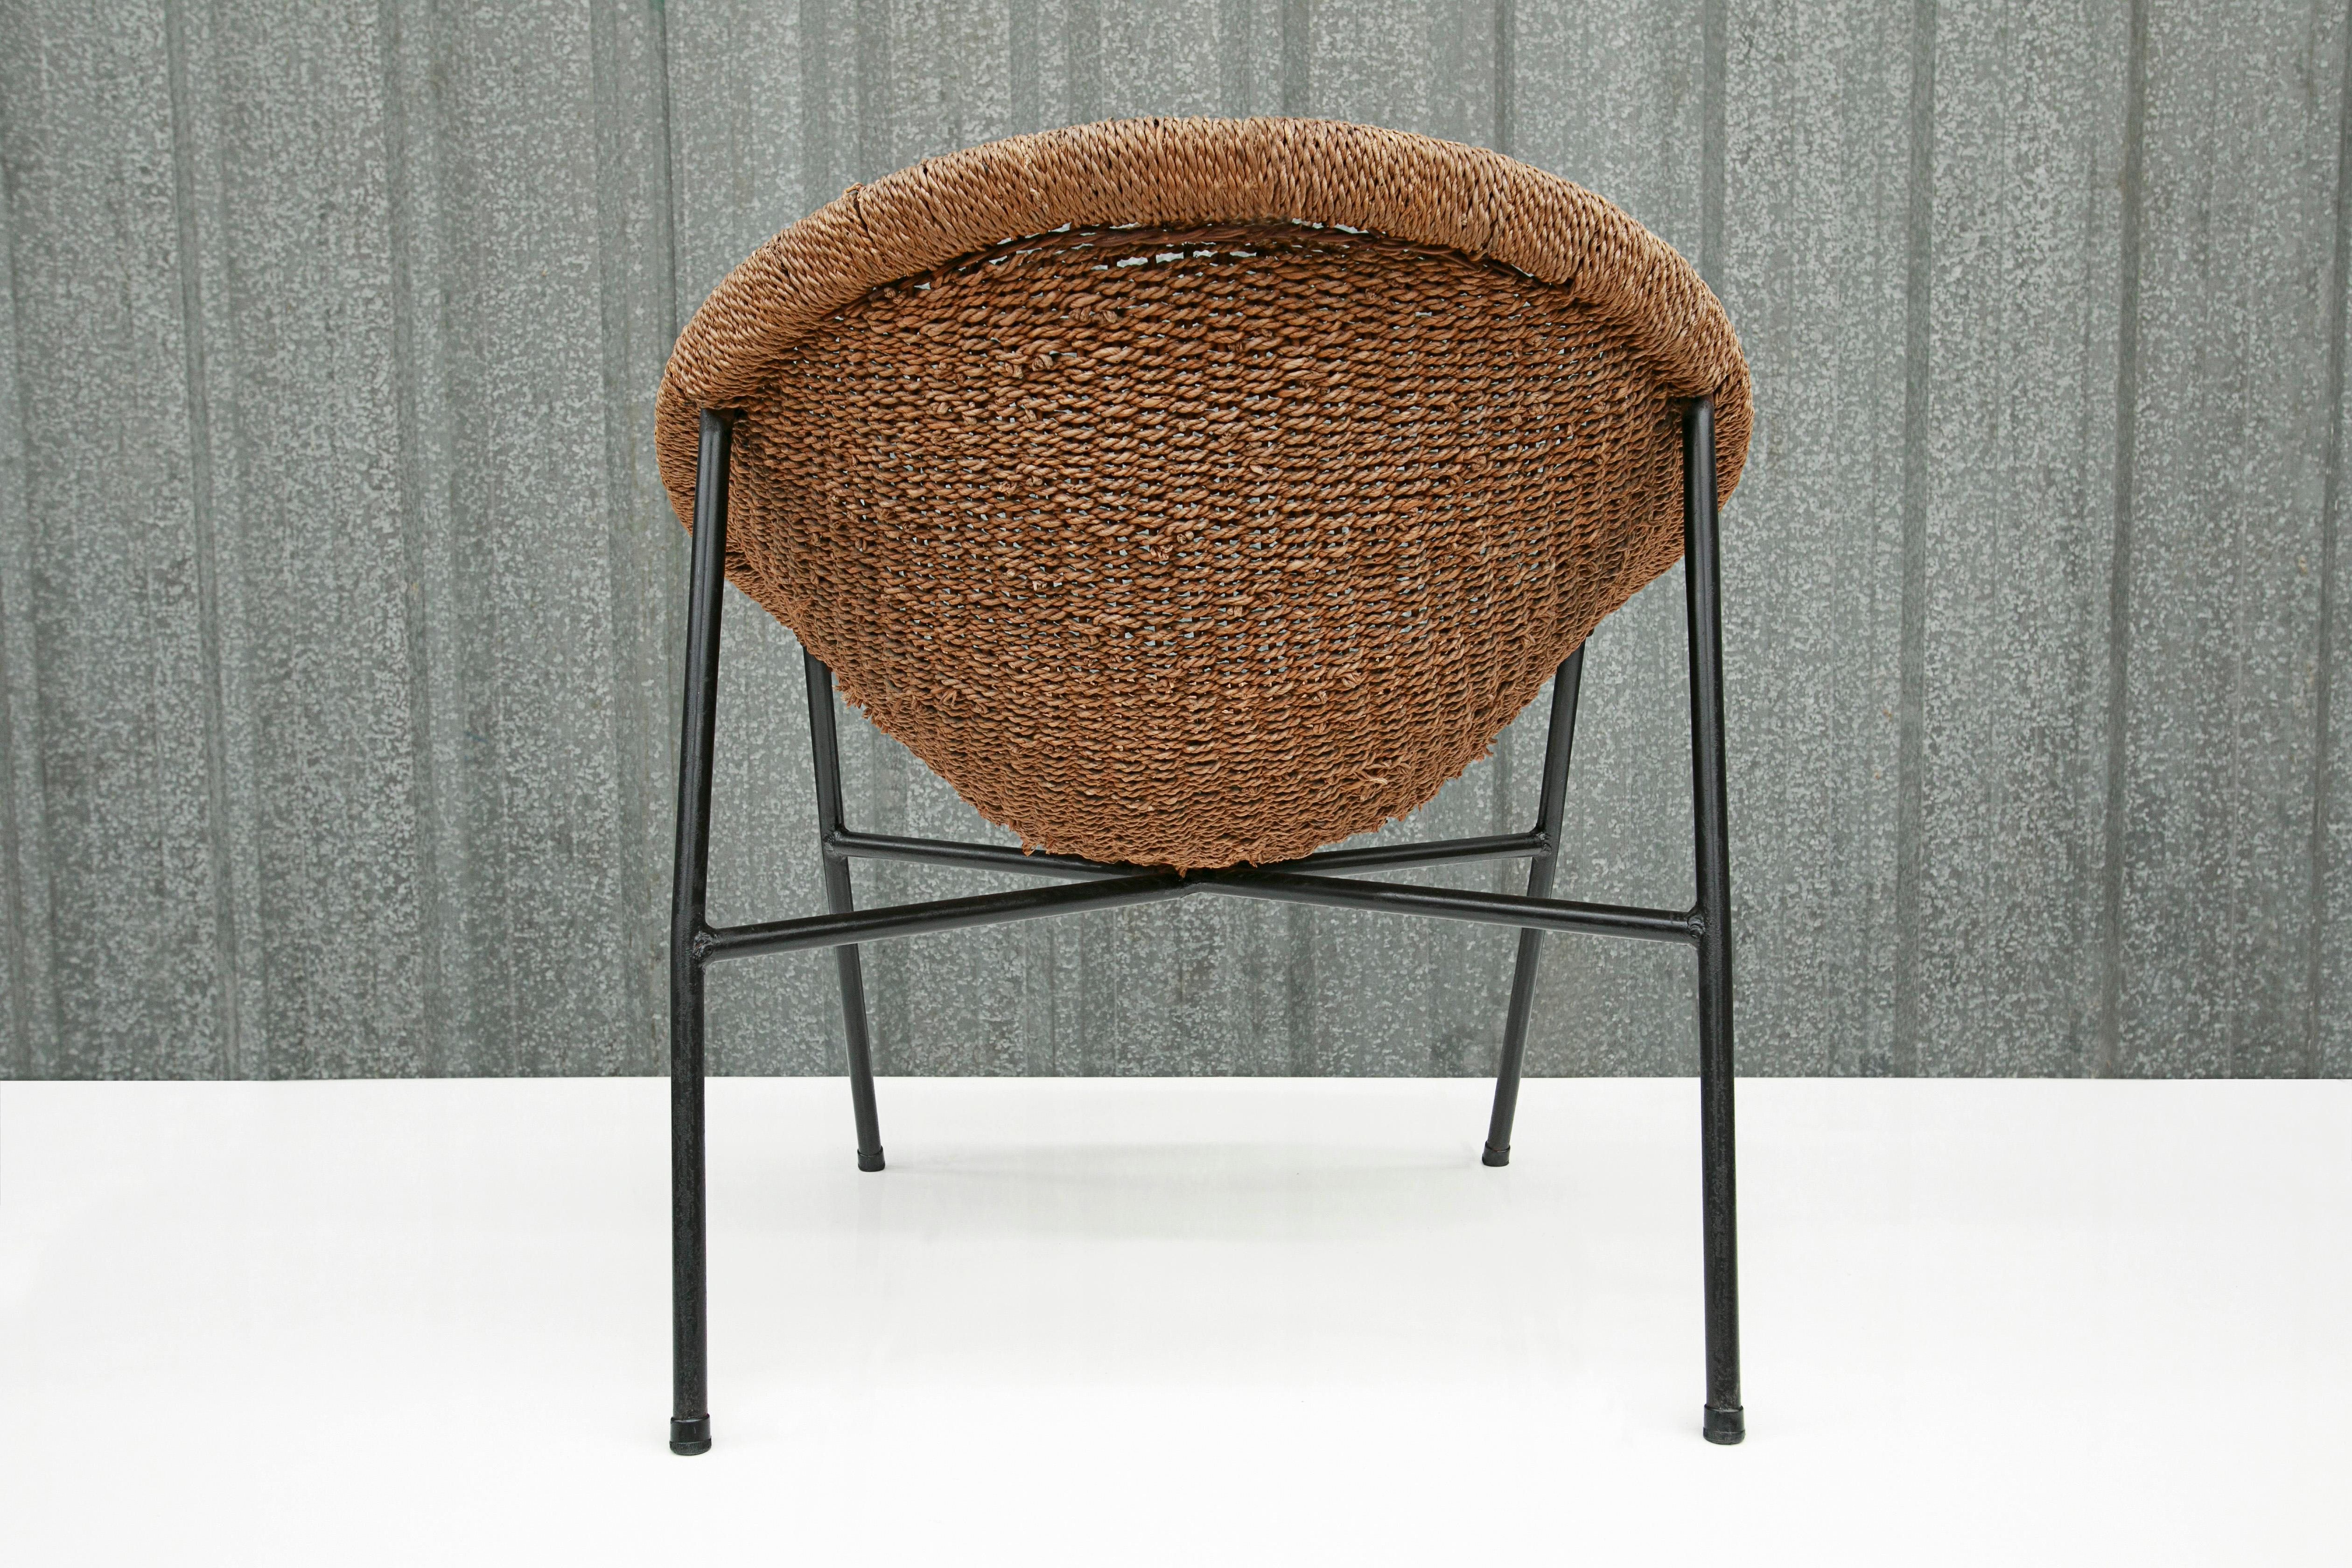 Mid-20th Century Brazilian Modern Chair in Cane & Iron by Carlo Hauner & Martin Eisler, 1950s For Sale